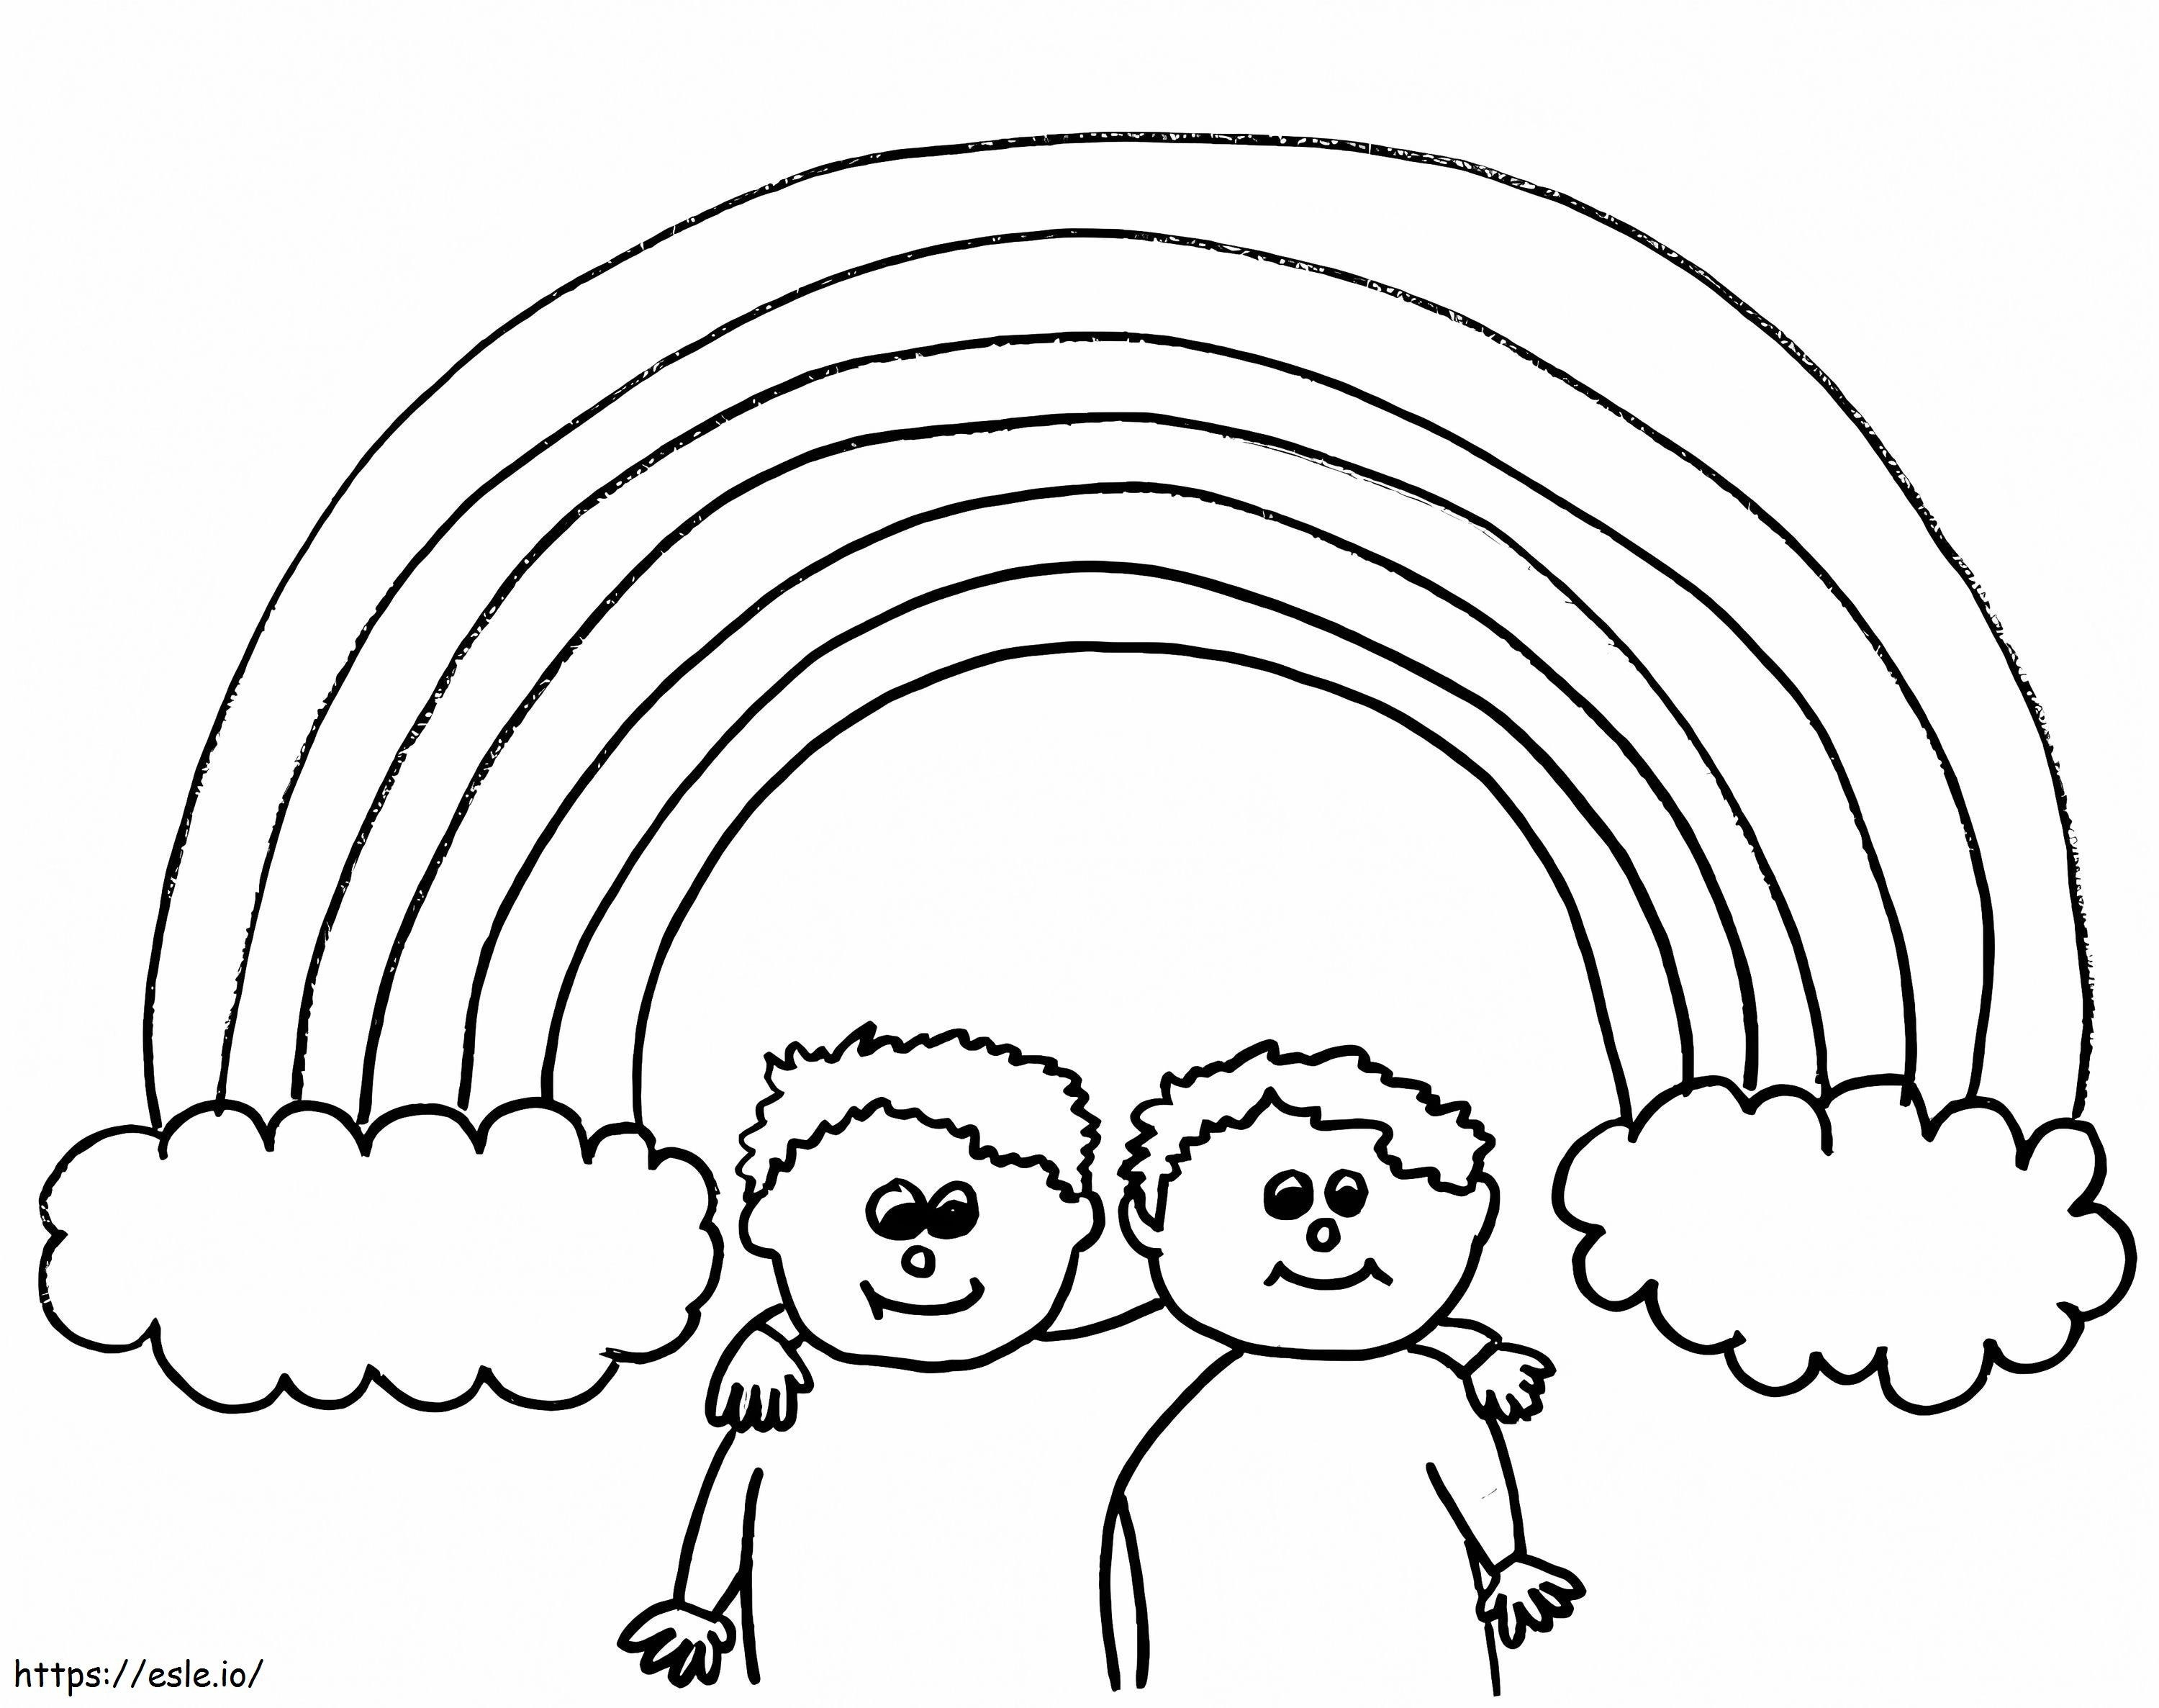 Boys And Rainbow coloring page